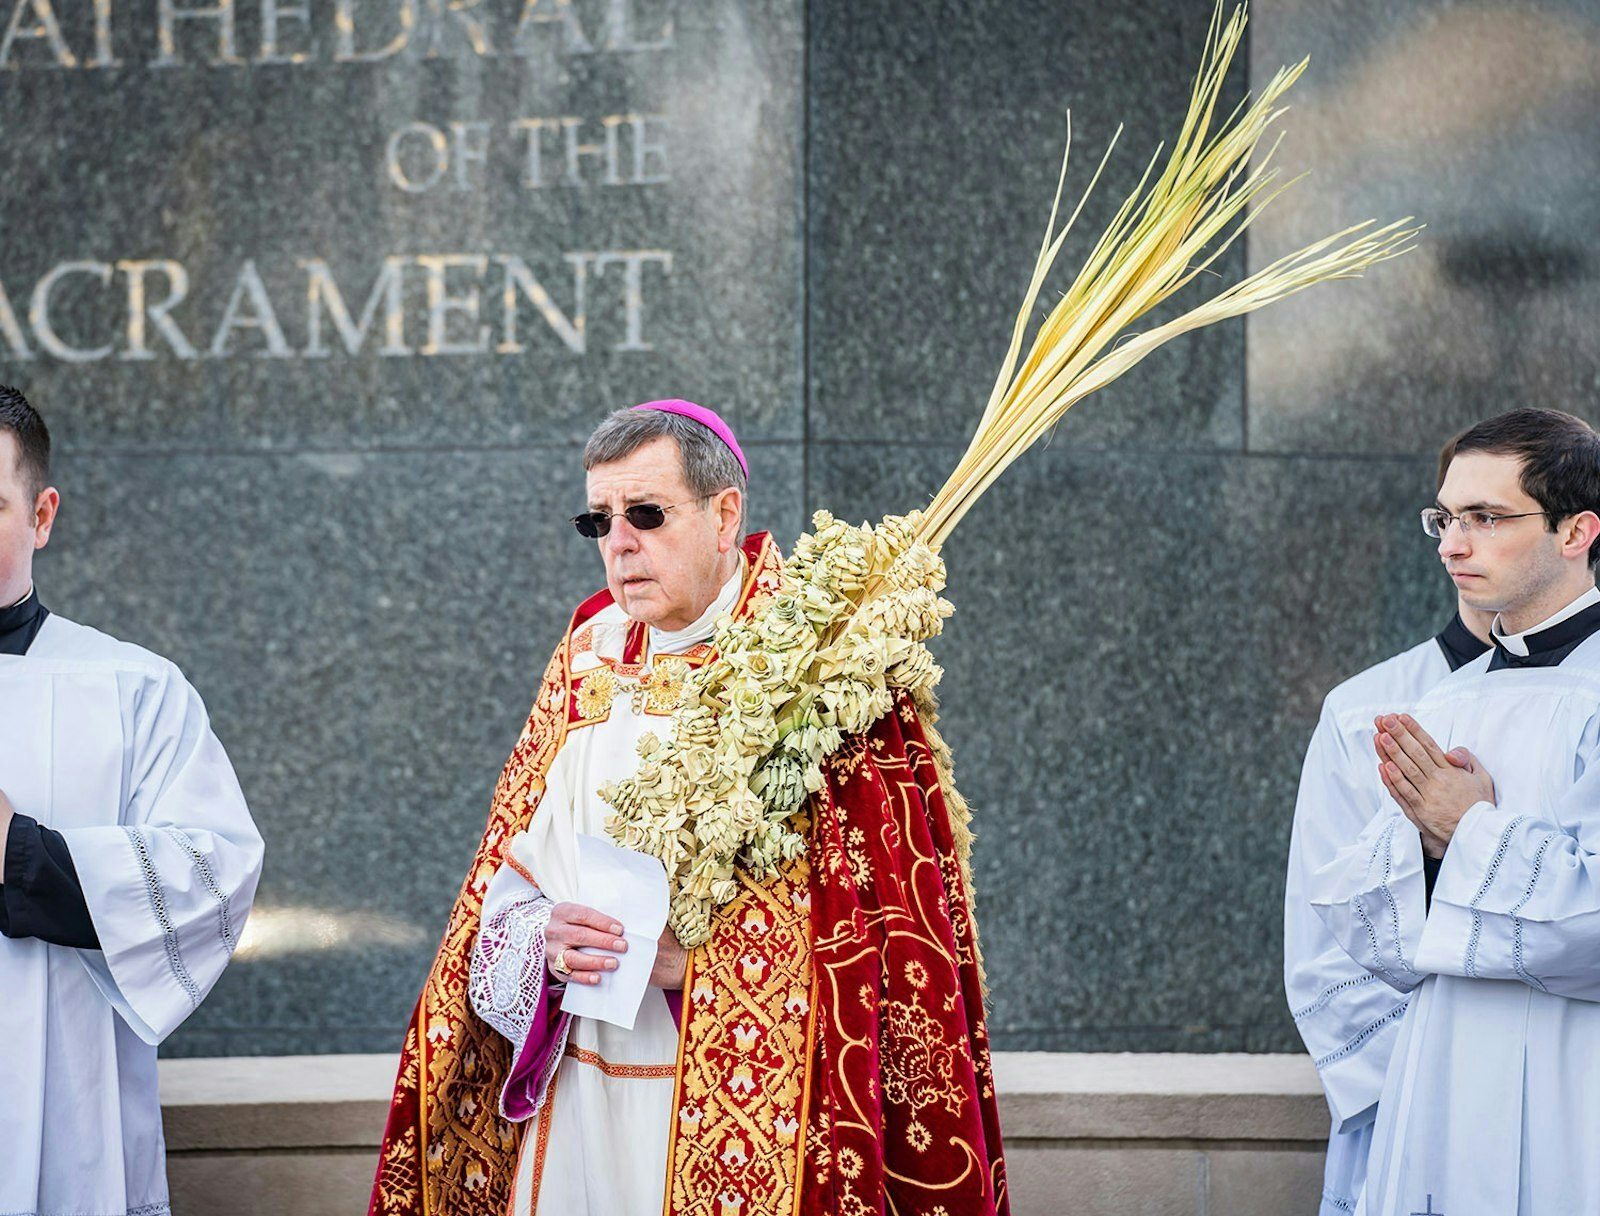 Archbishop Allen H. Vigneron carries a palm frond weaved by Tony Wenson during last year's Palm Sunday liturgy at the Cathedral of the Most Blessed Sacrament in Detroit. (Valaurian Waller | Detroit Catholic)